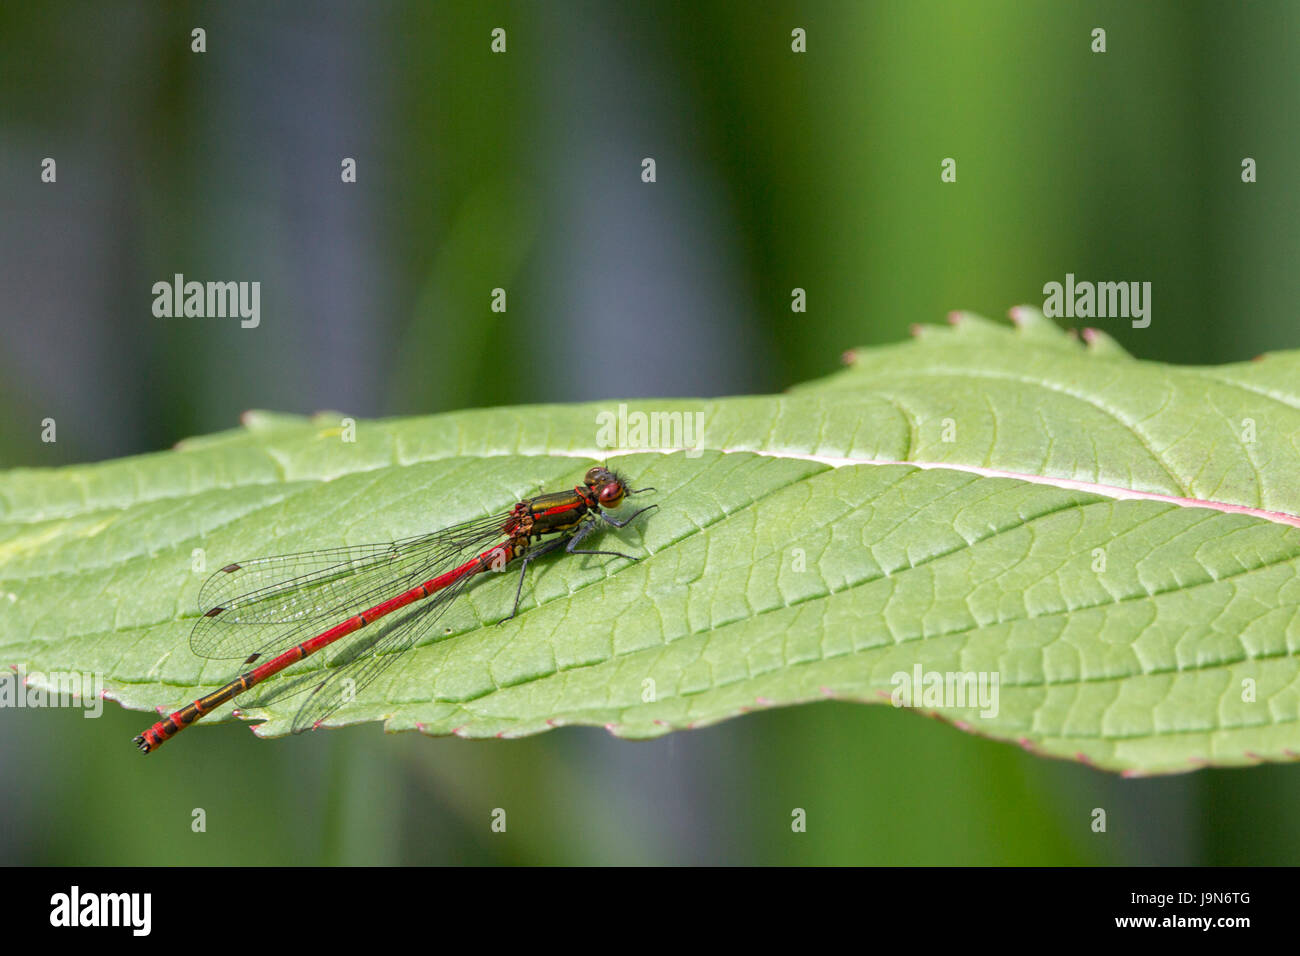 Damsel fly large red Pyrrhosoma Nymphula bright red with golden segments and black markings on abdomen resting on vegetation over water  compound eyes Stock Photo